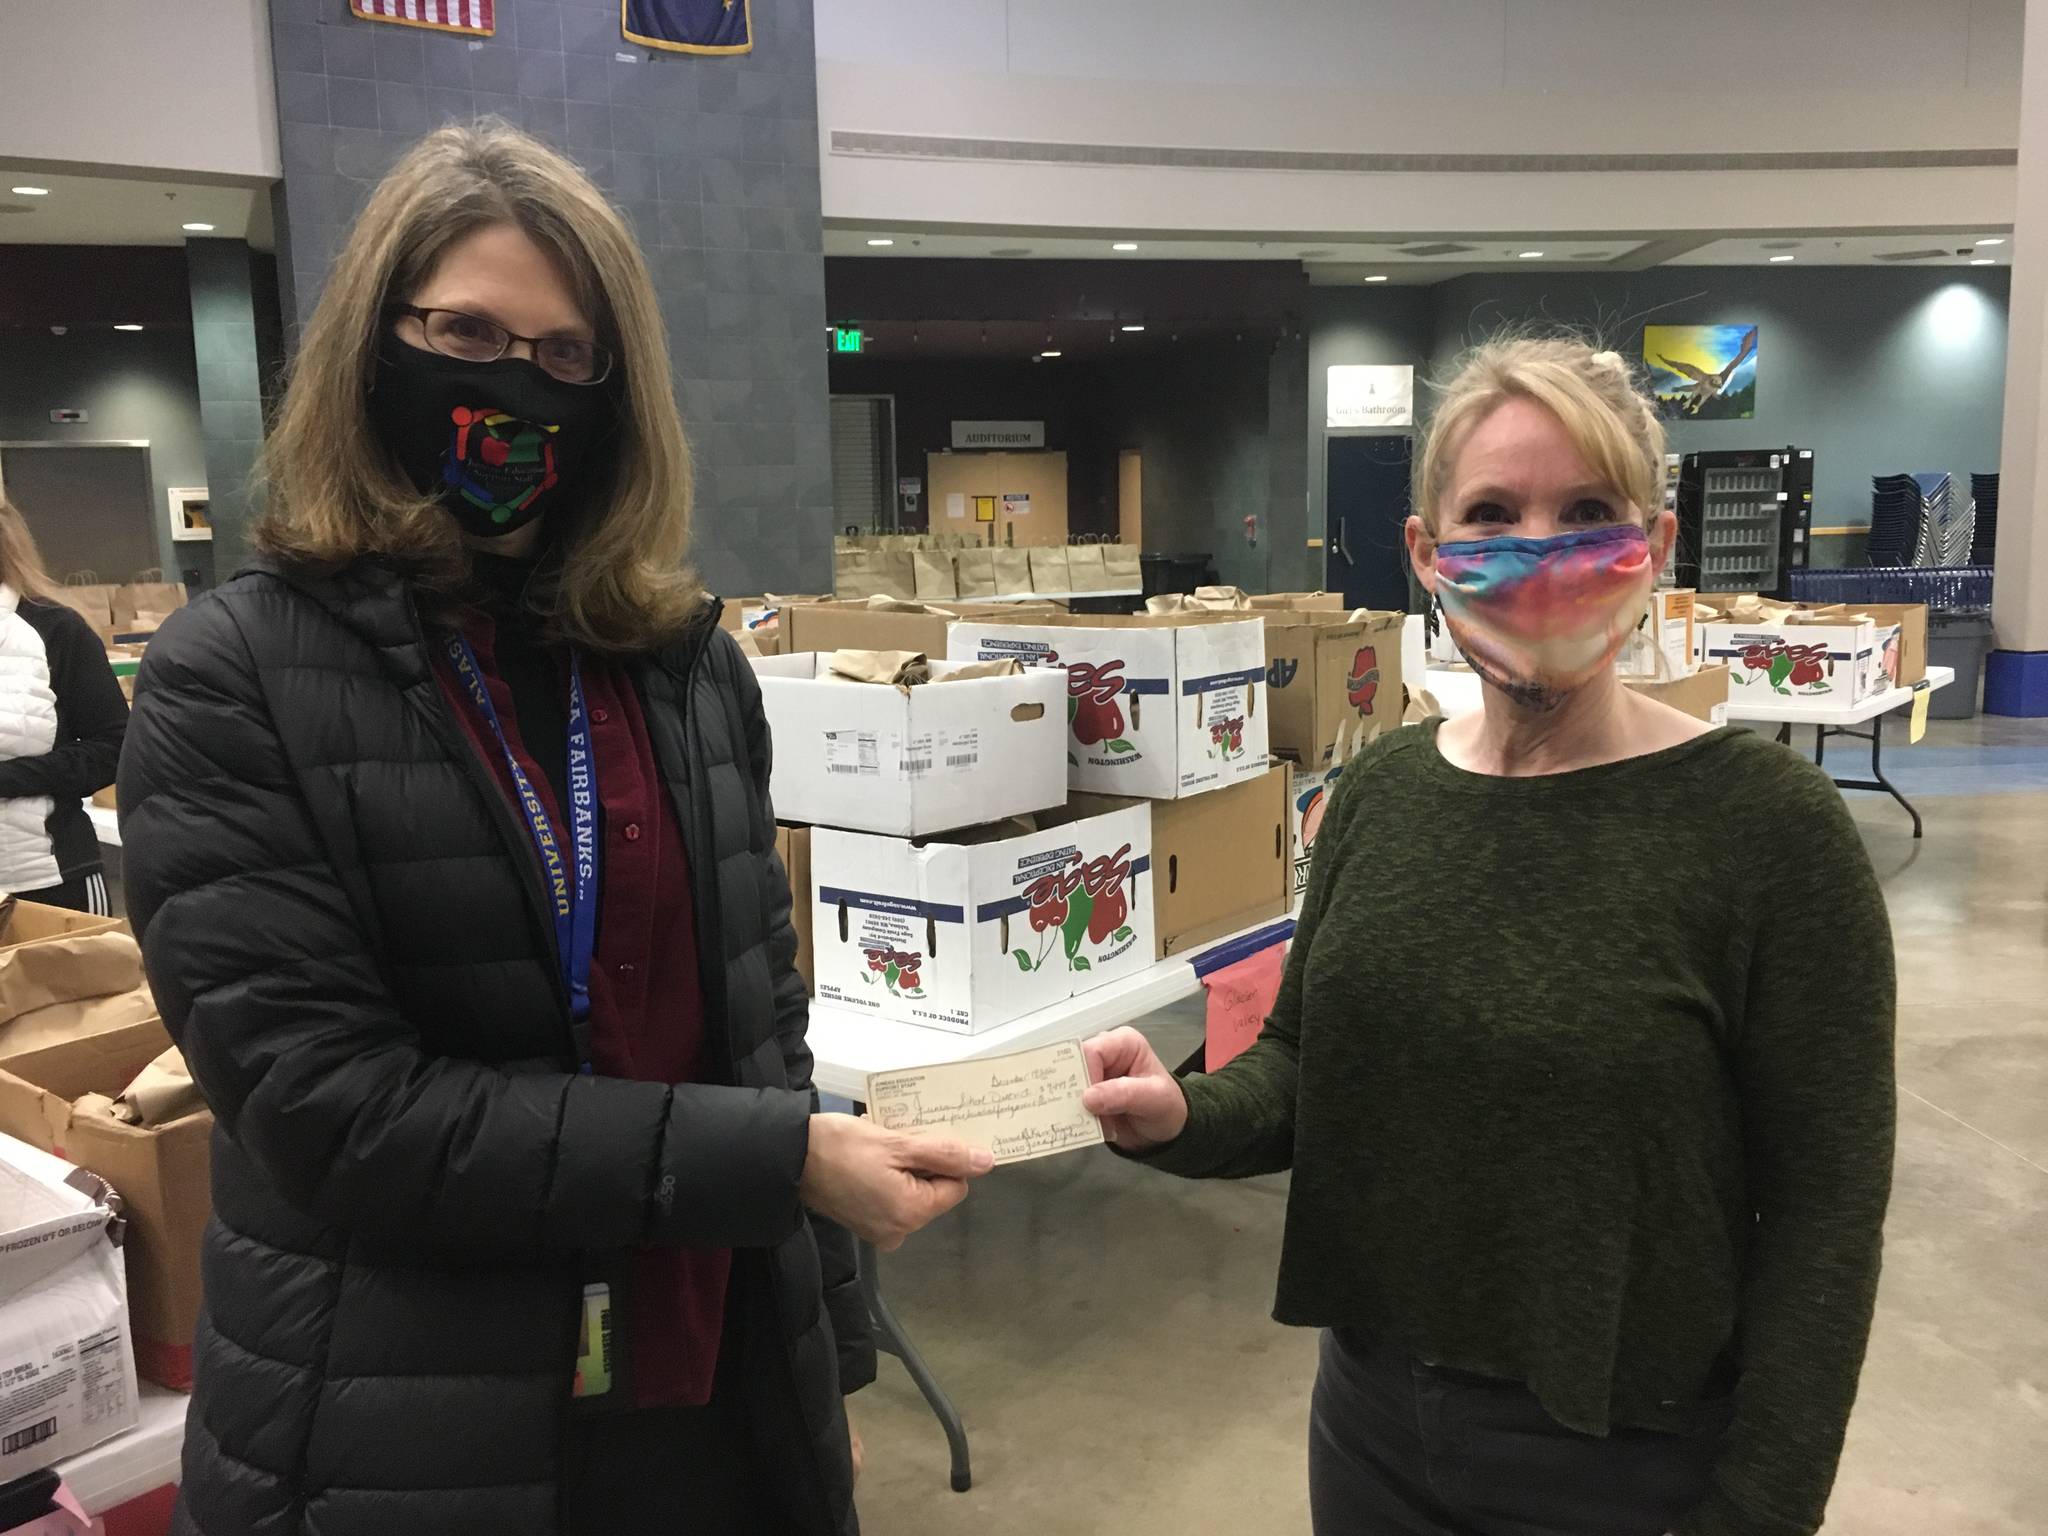 Catherine Pusich, left, hands a check from the Juneau Education Support Staff to Adrianne Schwartz to clear all money owed for school meals at Thunder Mountain High School on Dec. 21, 2020. (Michael S. Lockett / Juneau Empire)